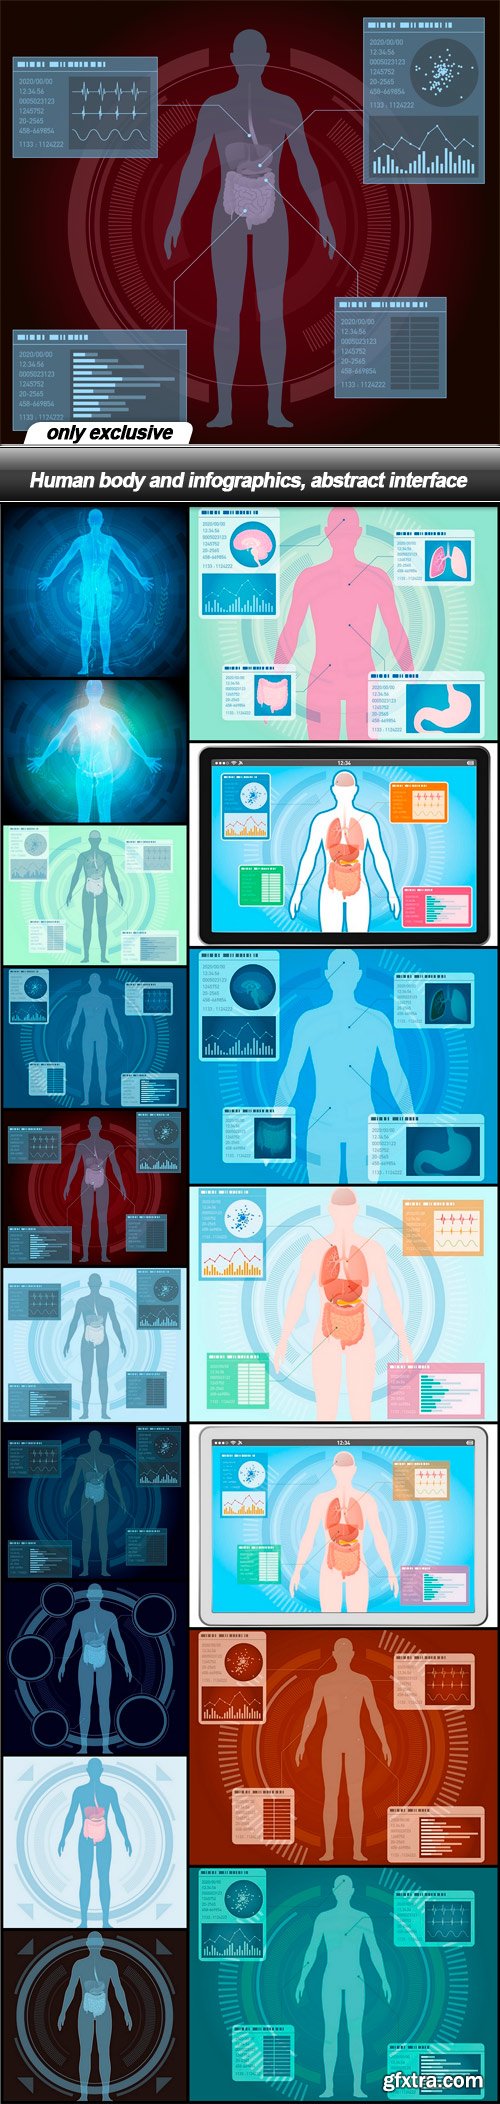 Human body and infographics, abstract interface - 17 EPS